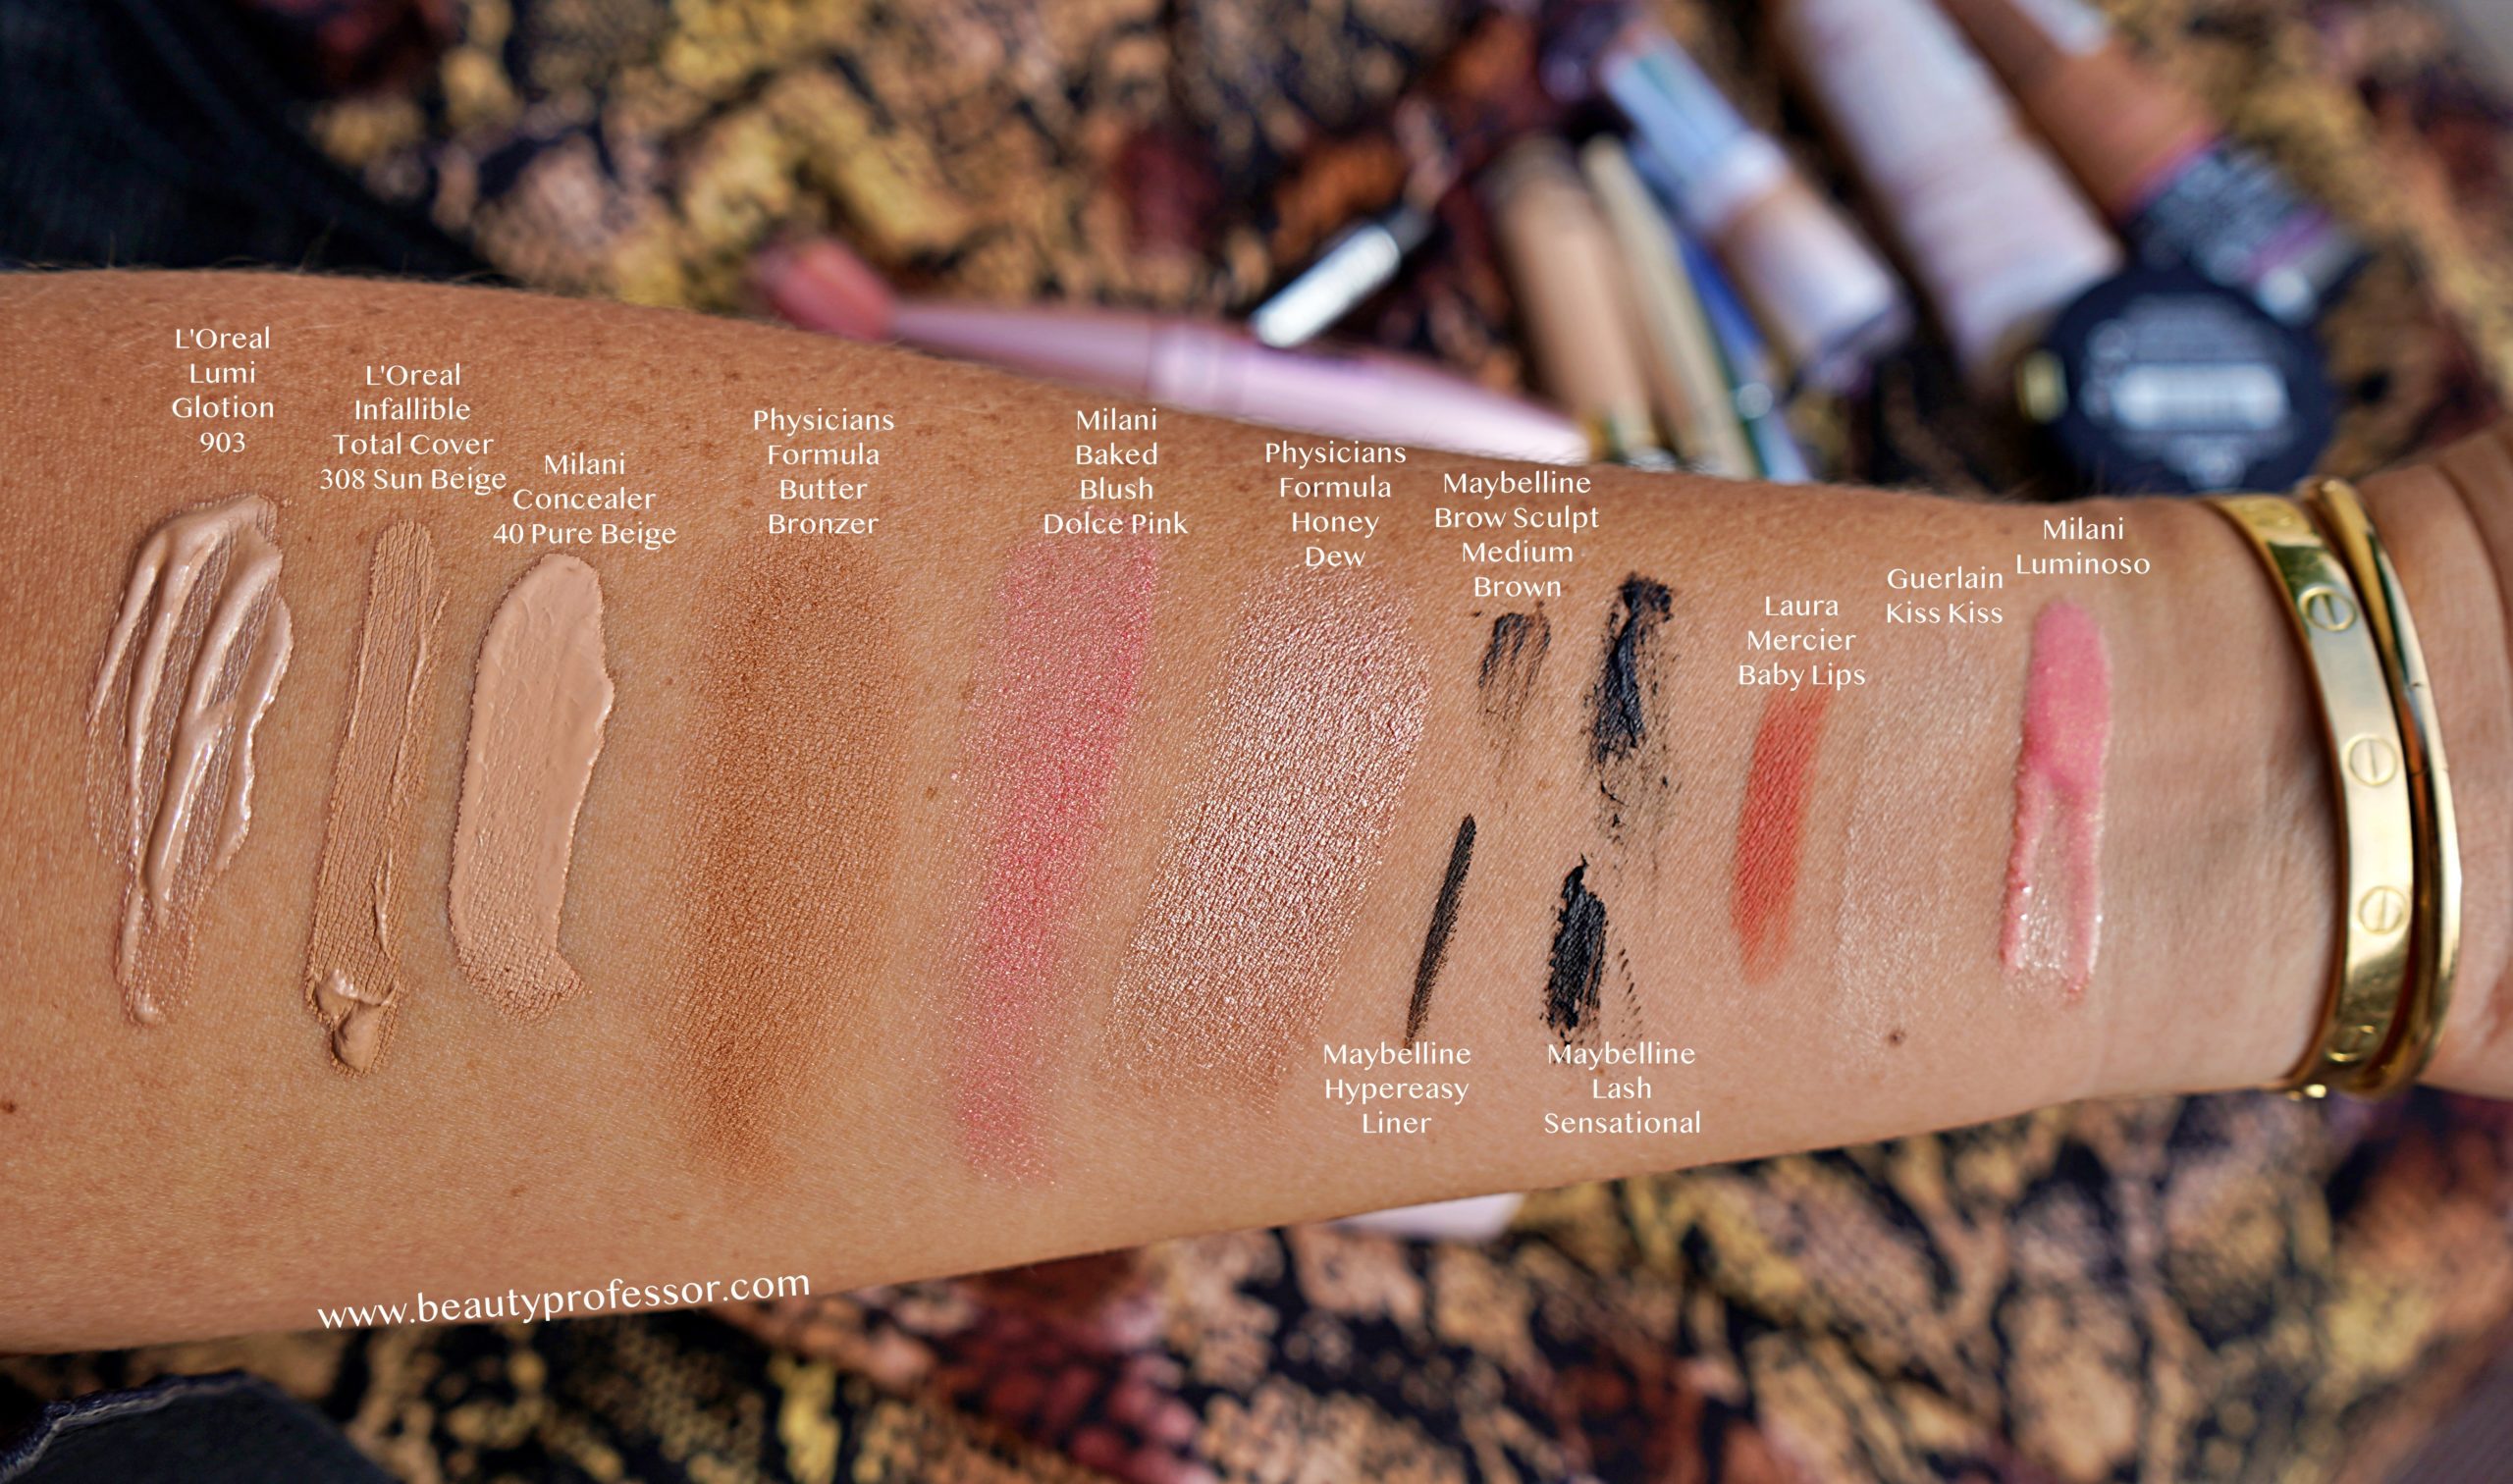 Swatches of the complete face makeup